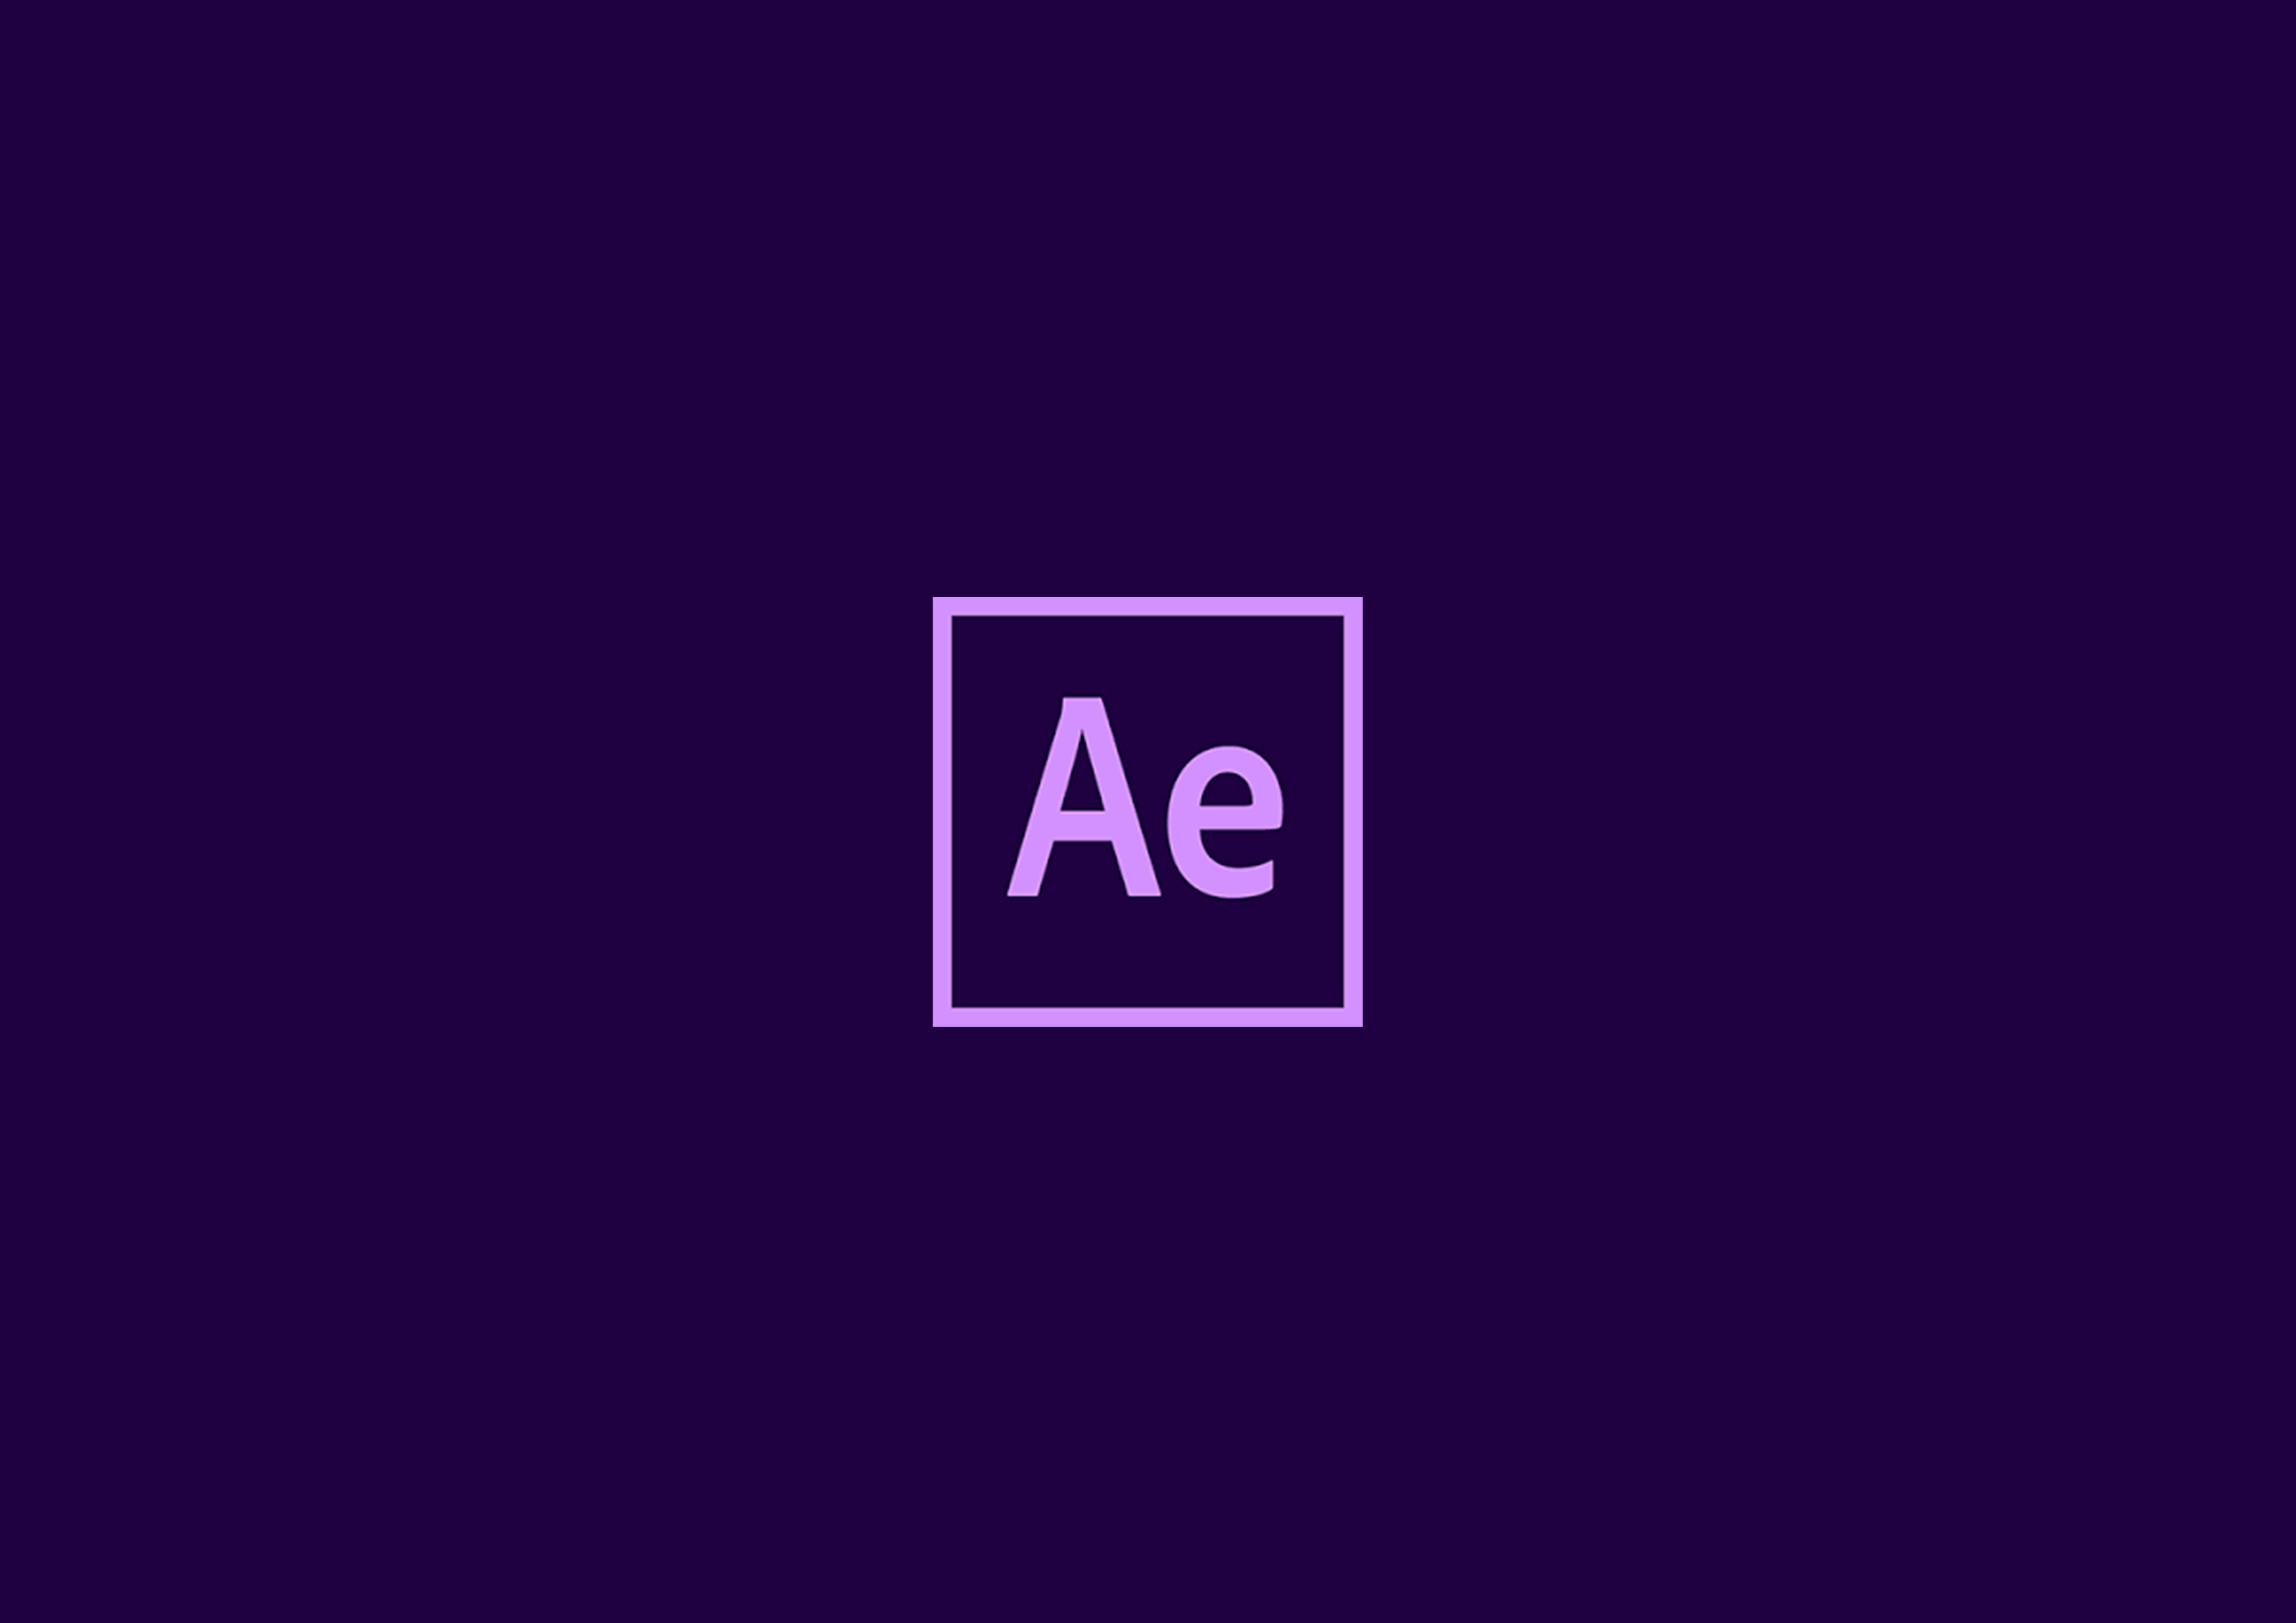 Adobe after effects cs4 free download 64 bit